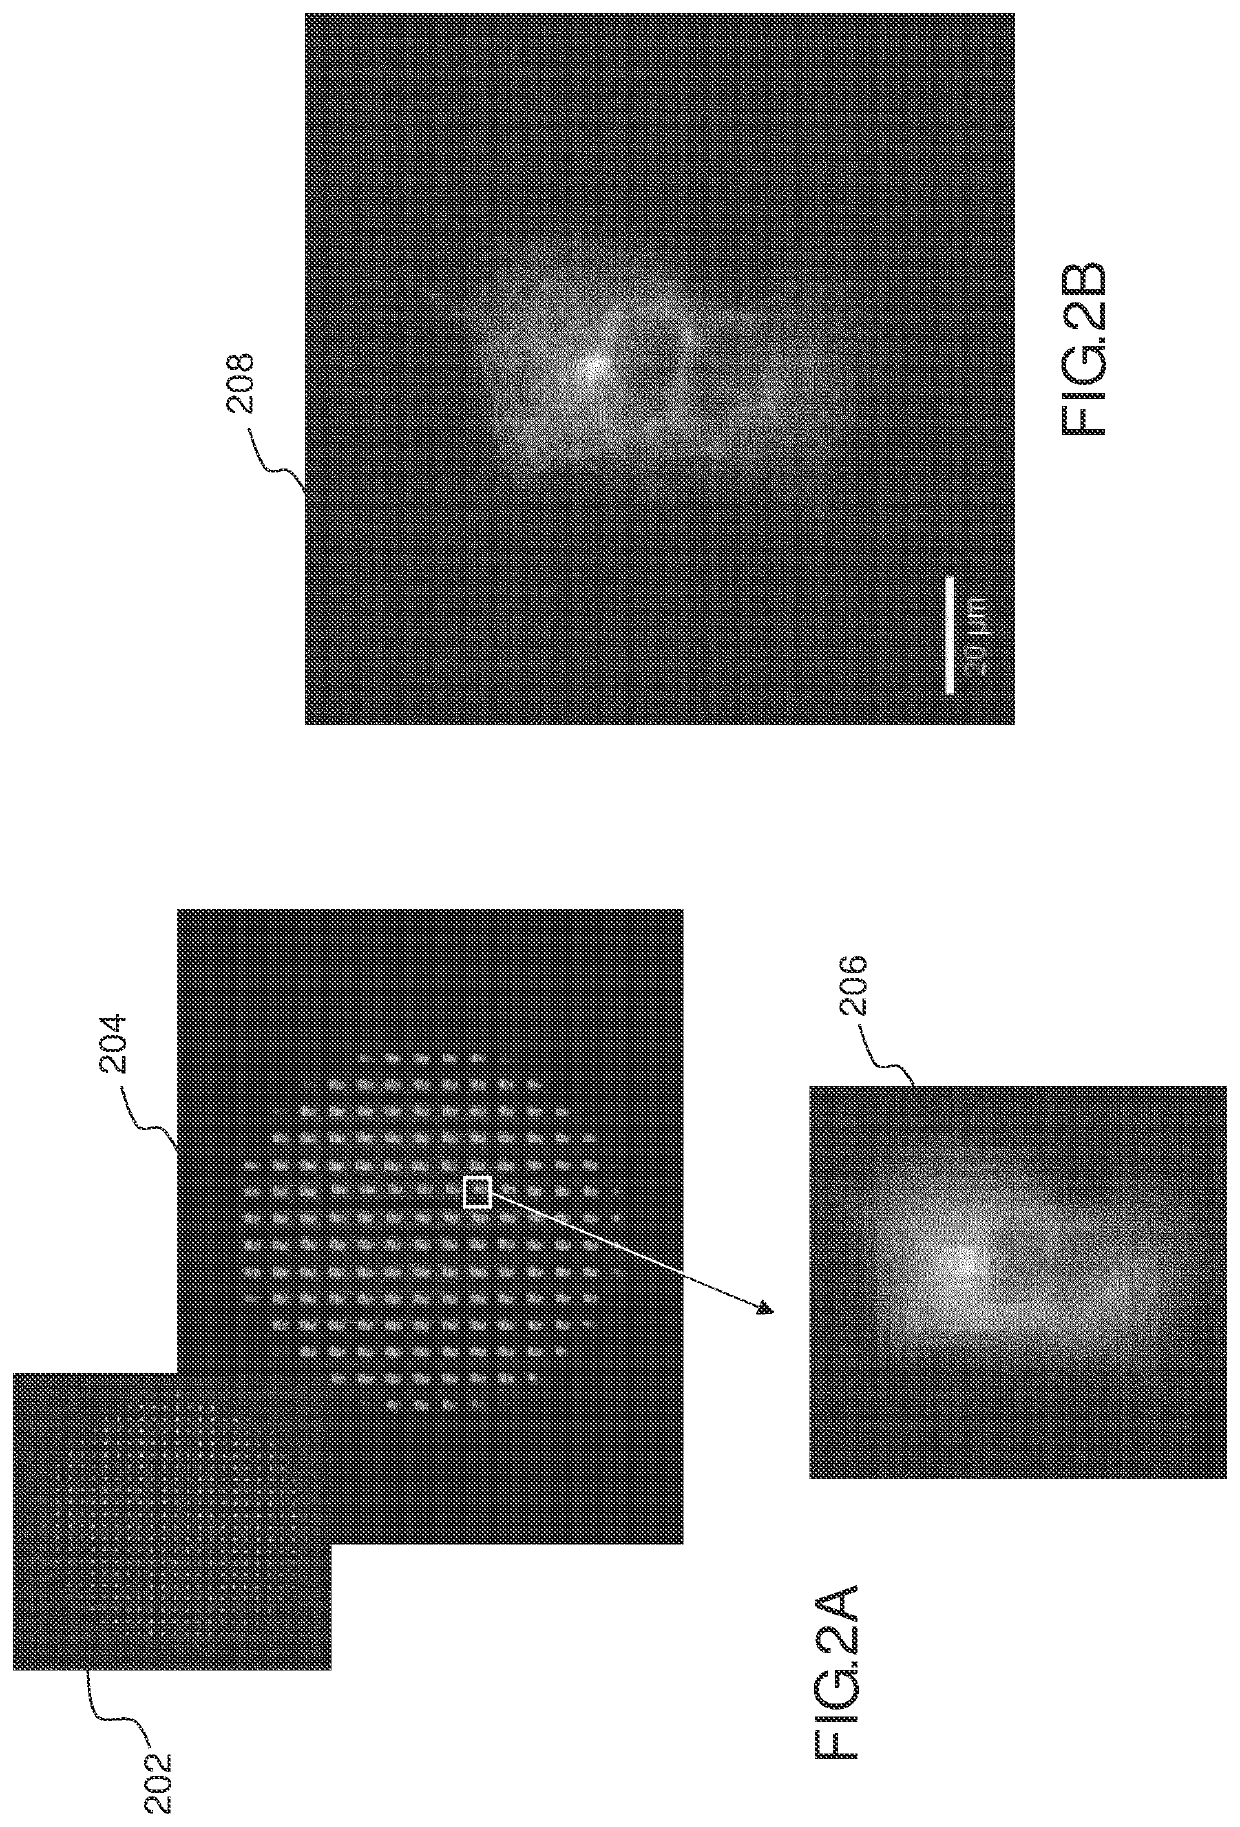 Device for wavefront analysis and microscopic imaging systems comprising such analysis devices